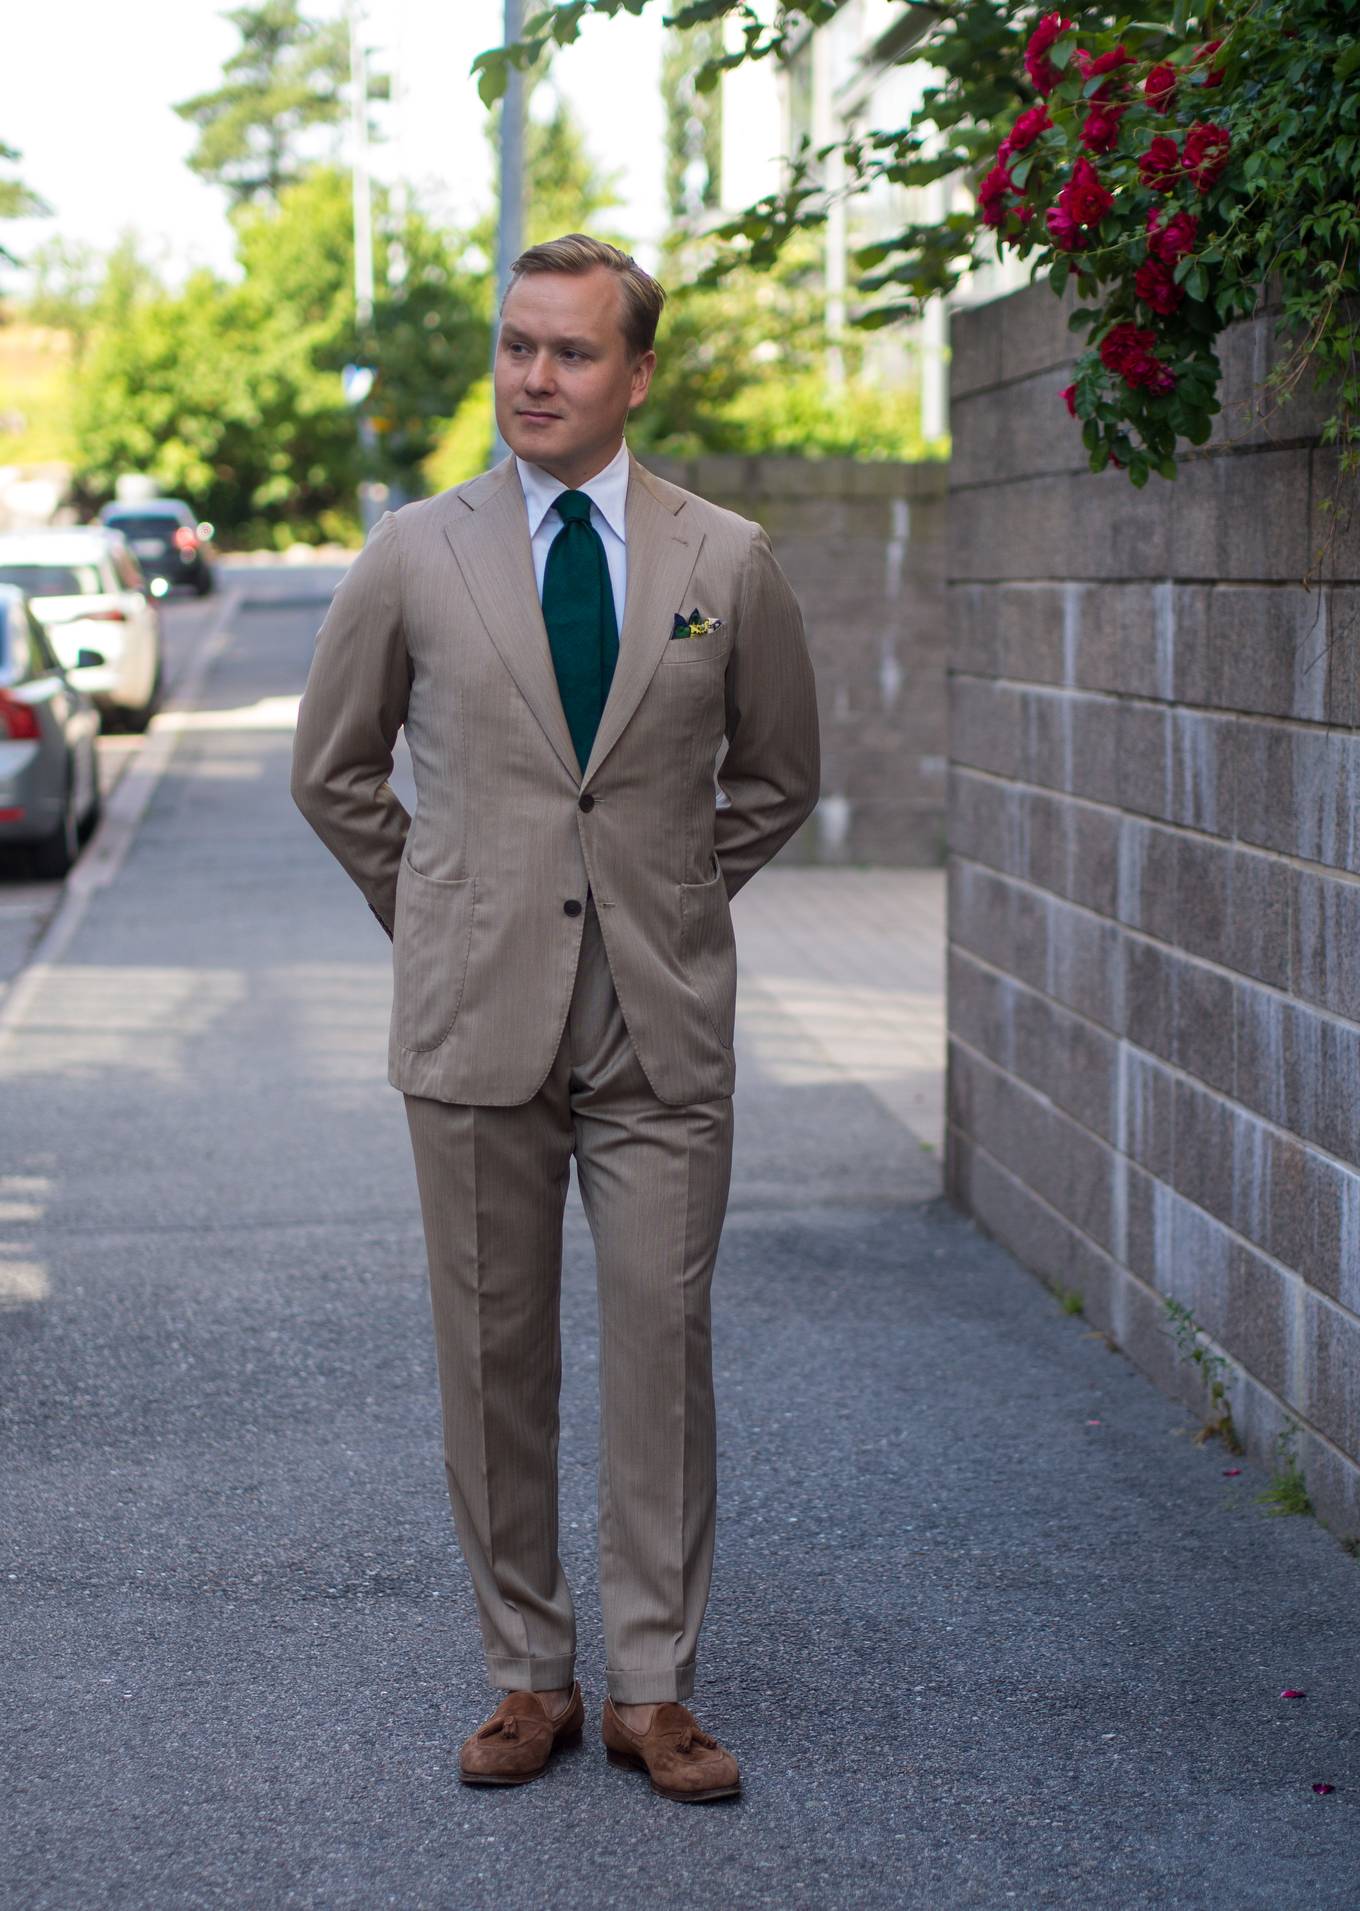 Wearing a Solaro Wool Suit with Green Accessories